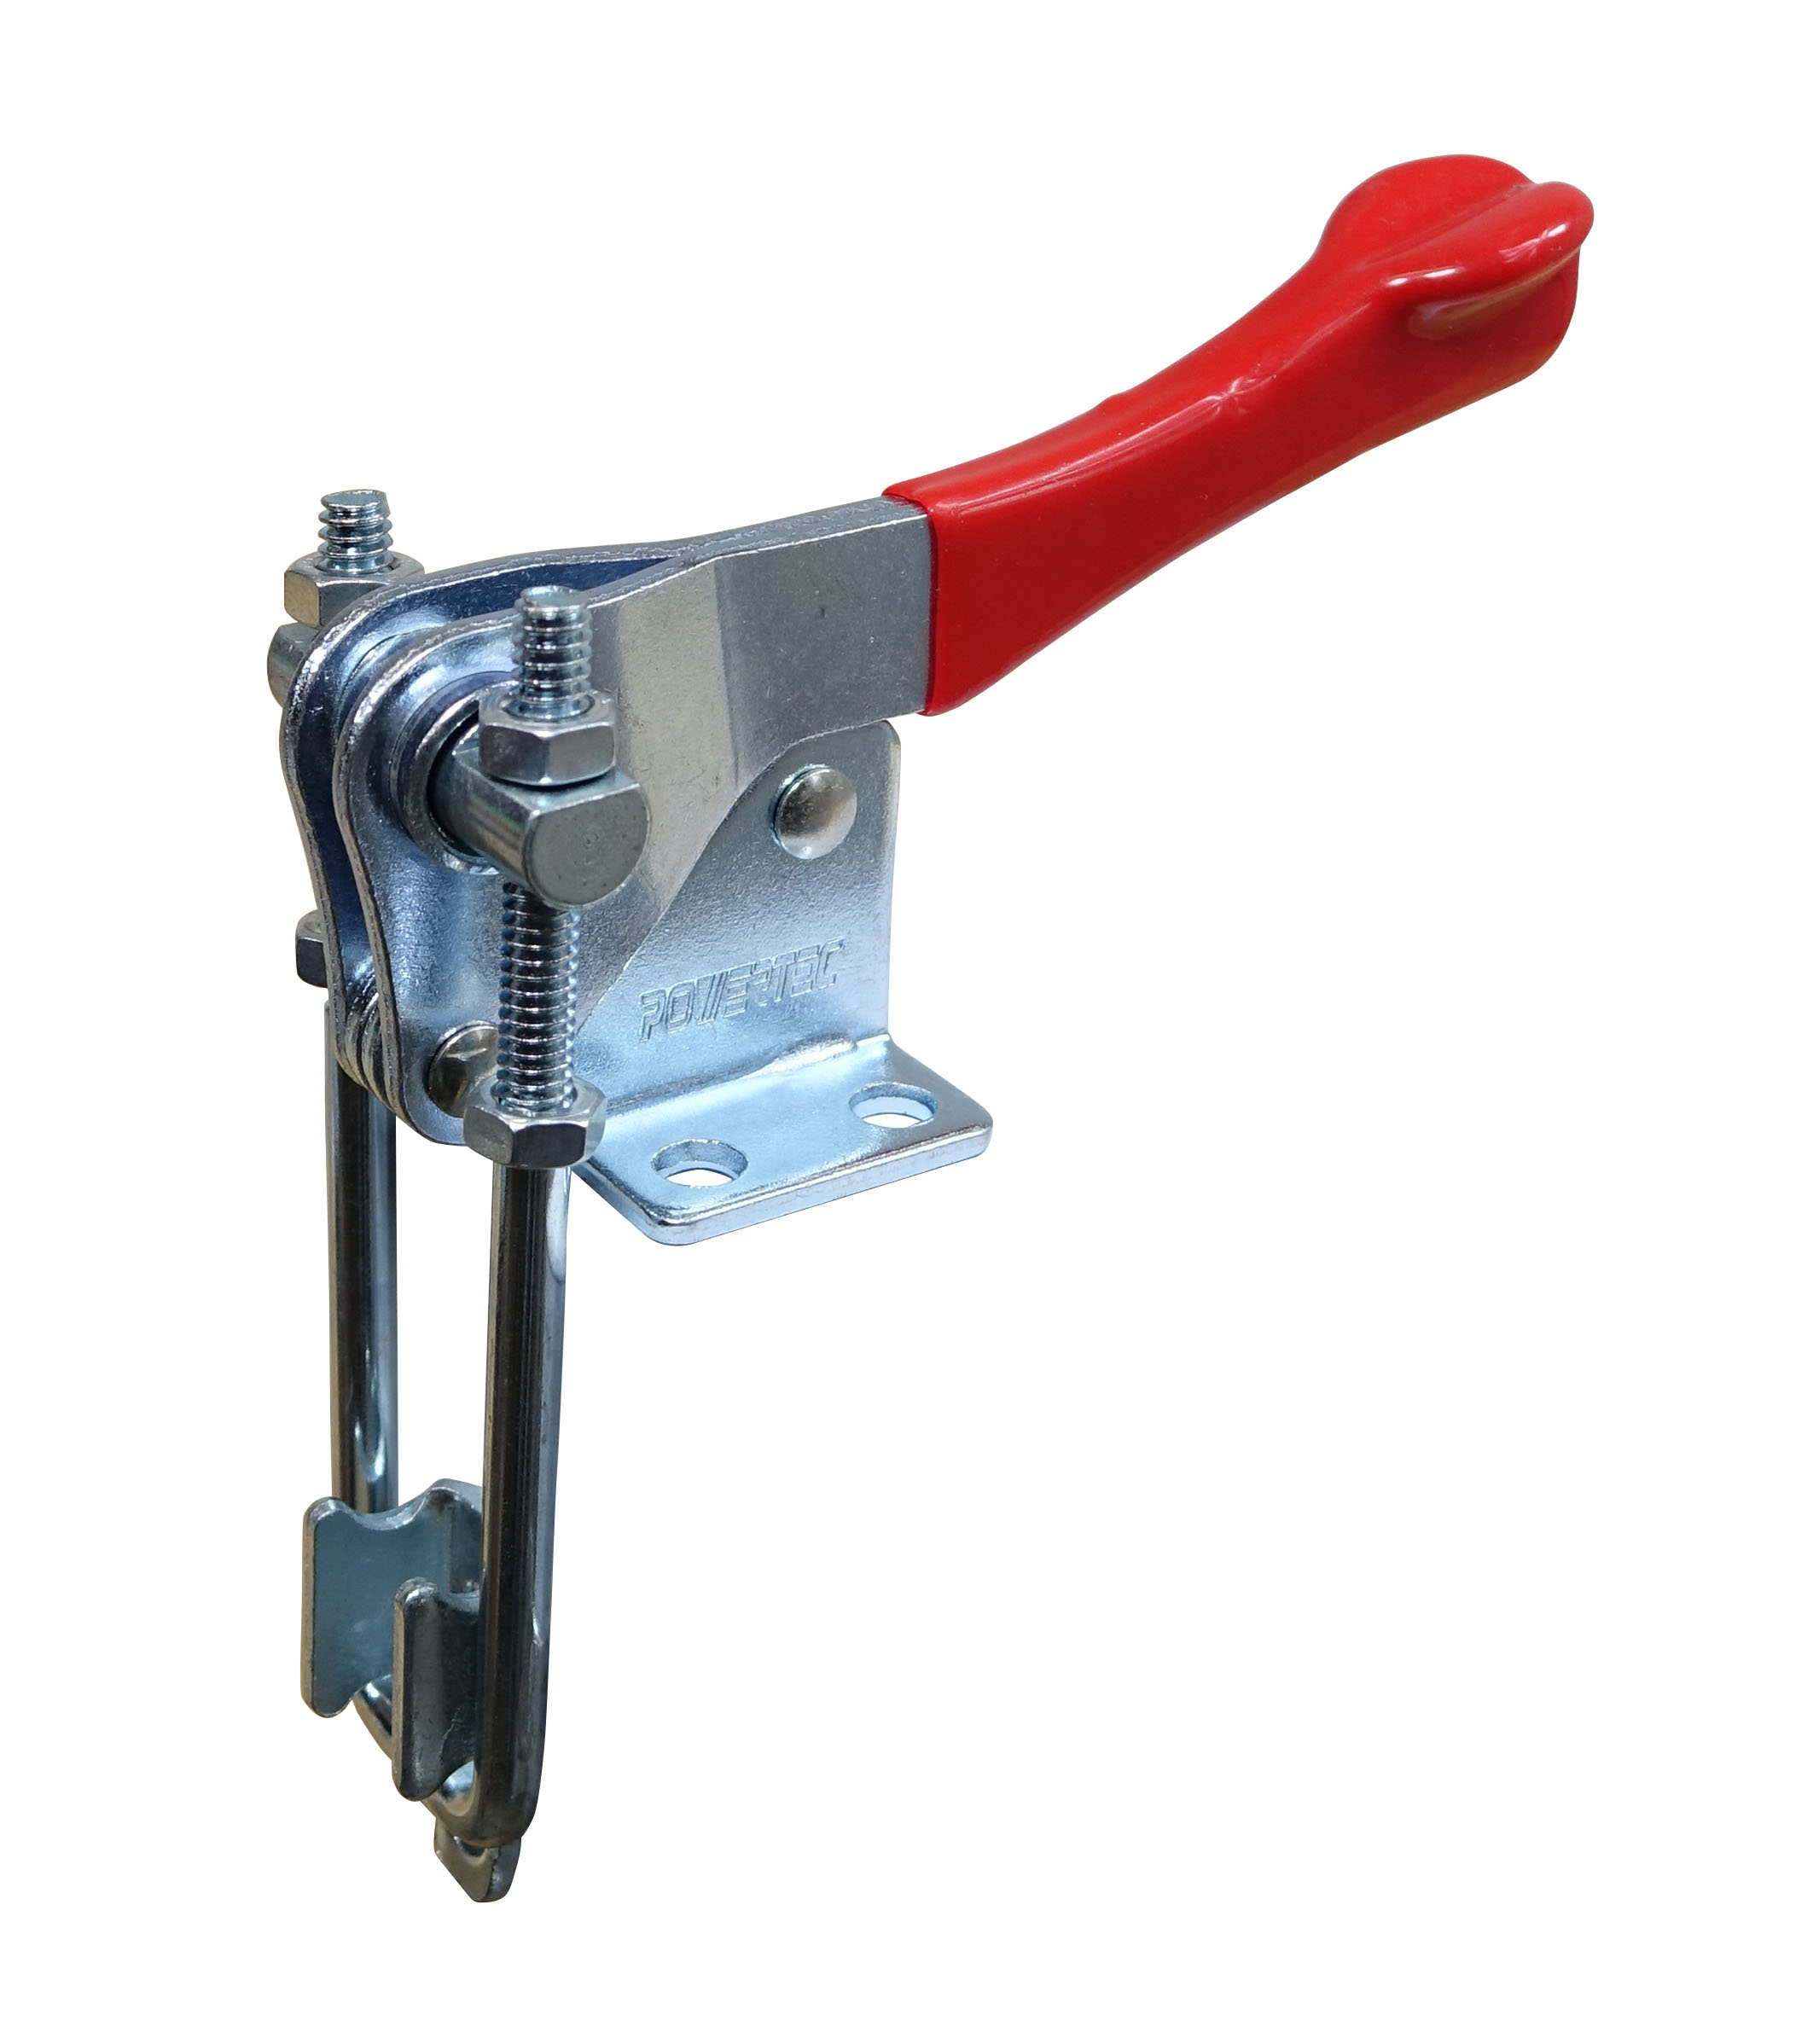 Powertec 20309 Vertical Latch-Action Toggle Clamp, 1000 lbs Capacity Number, 334